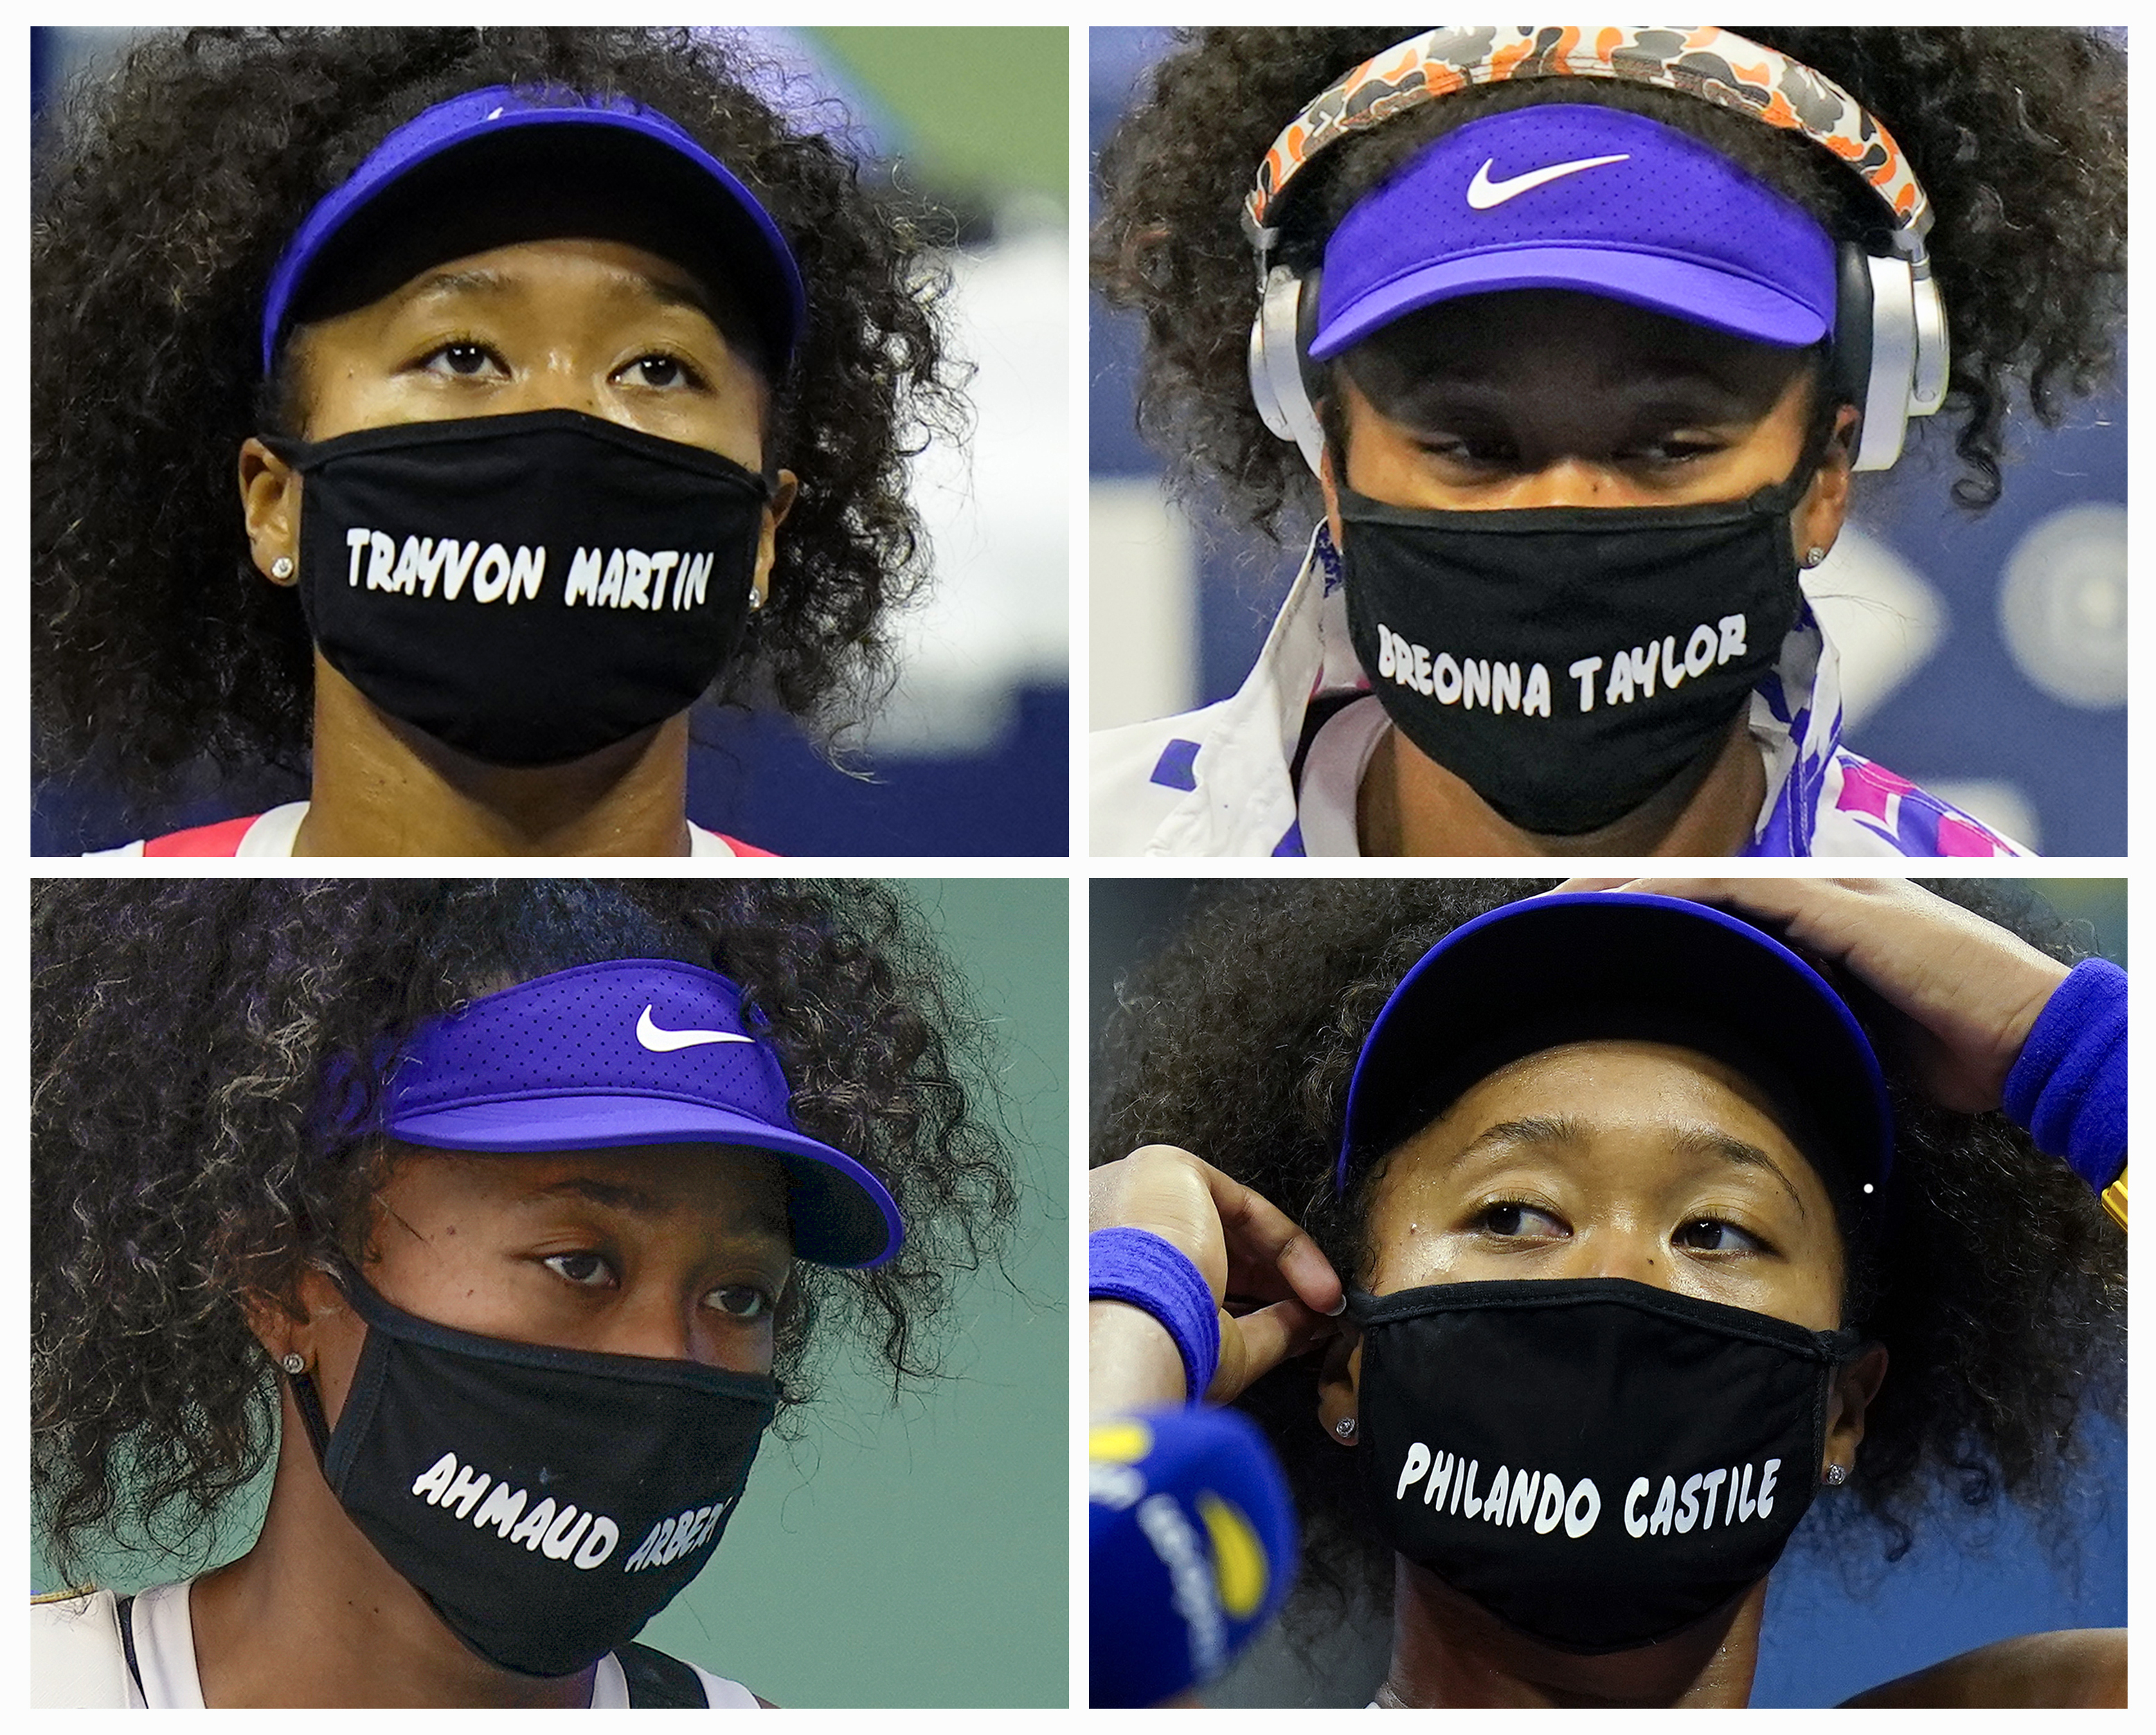 Naomi Osaka Grapples With Fame, Family and Injustice In New